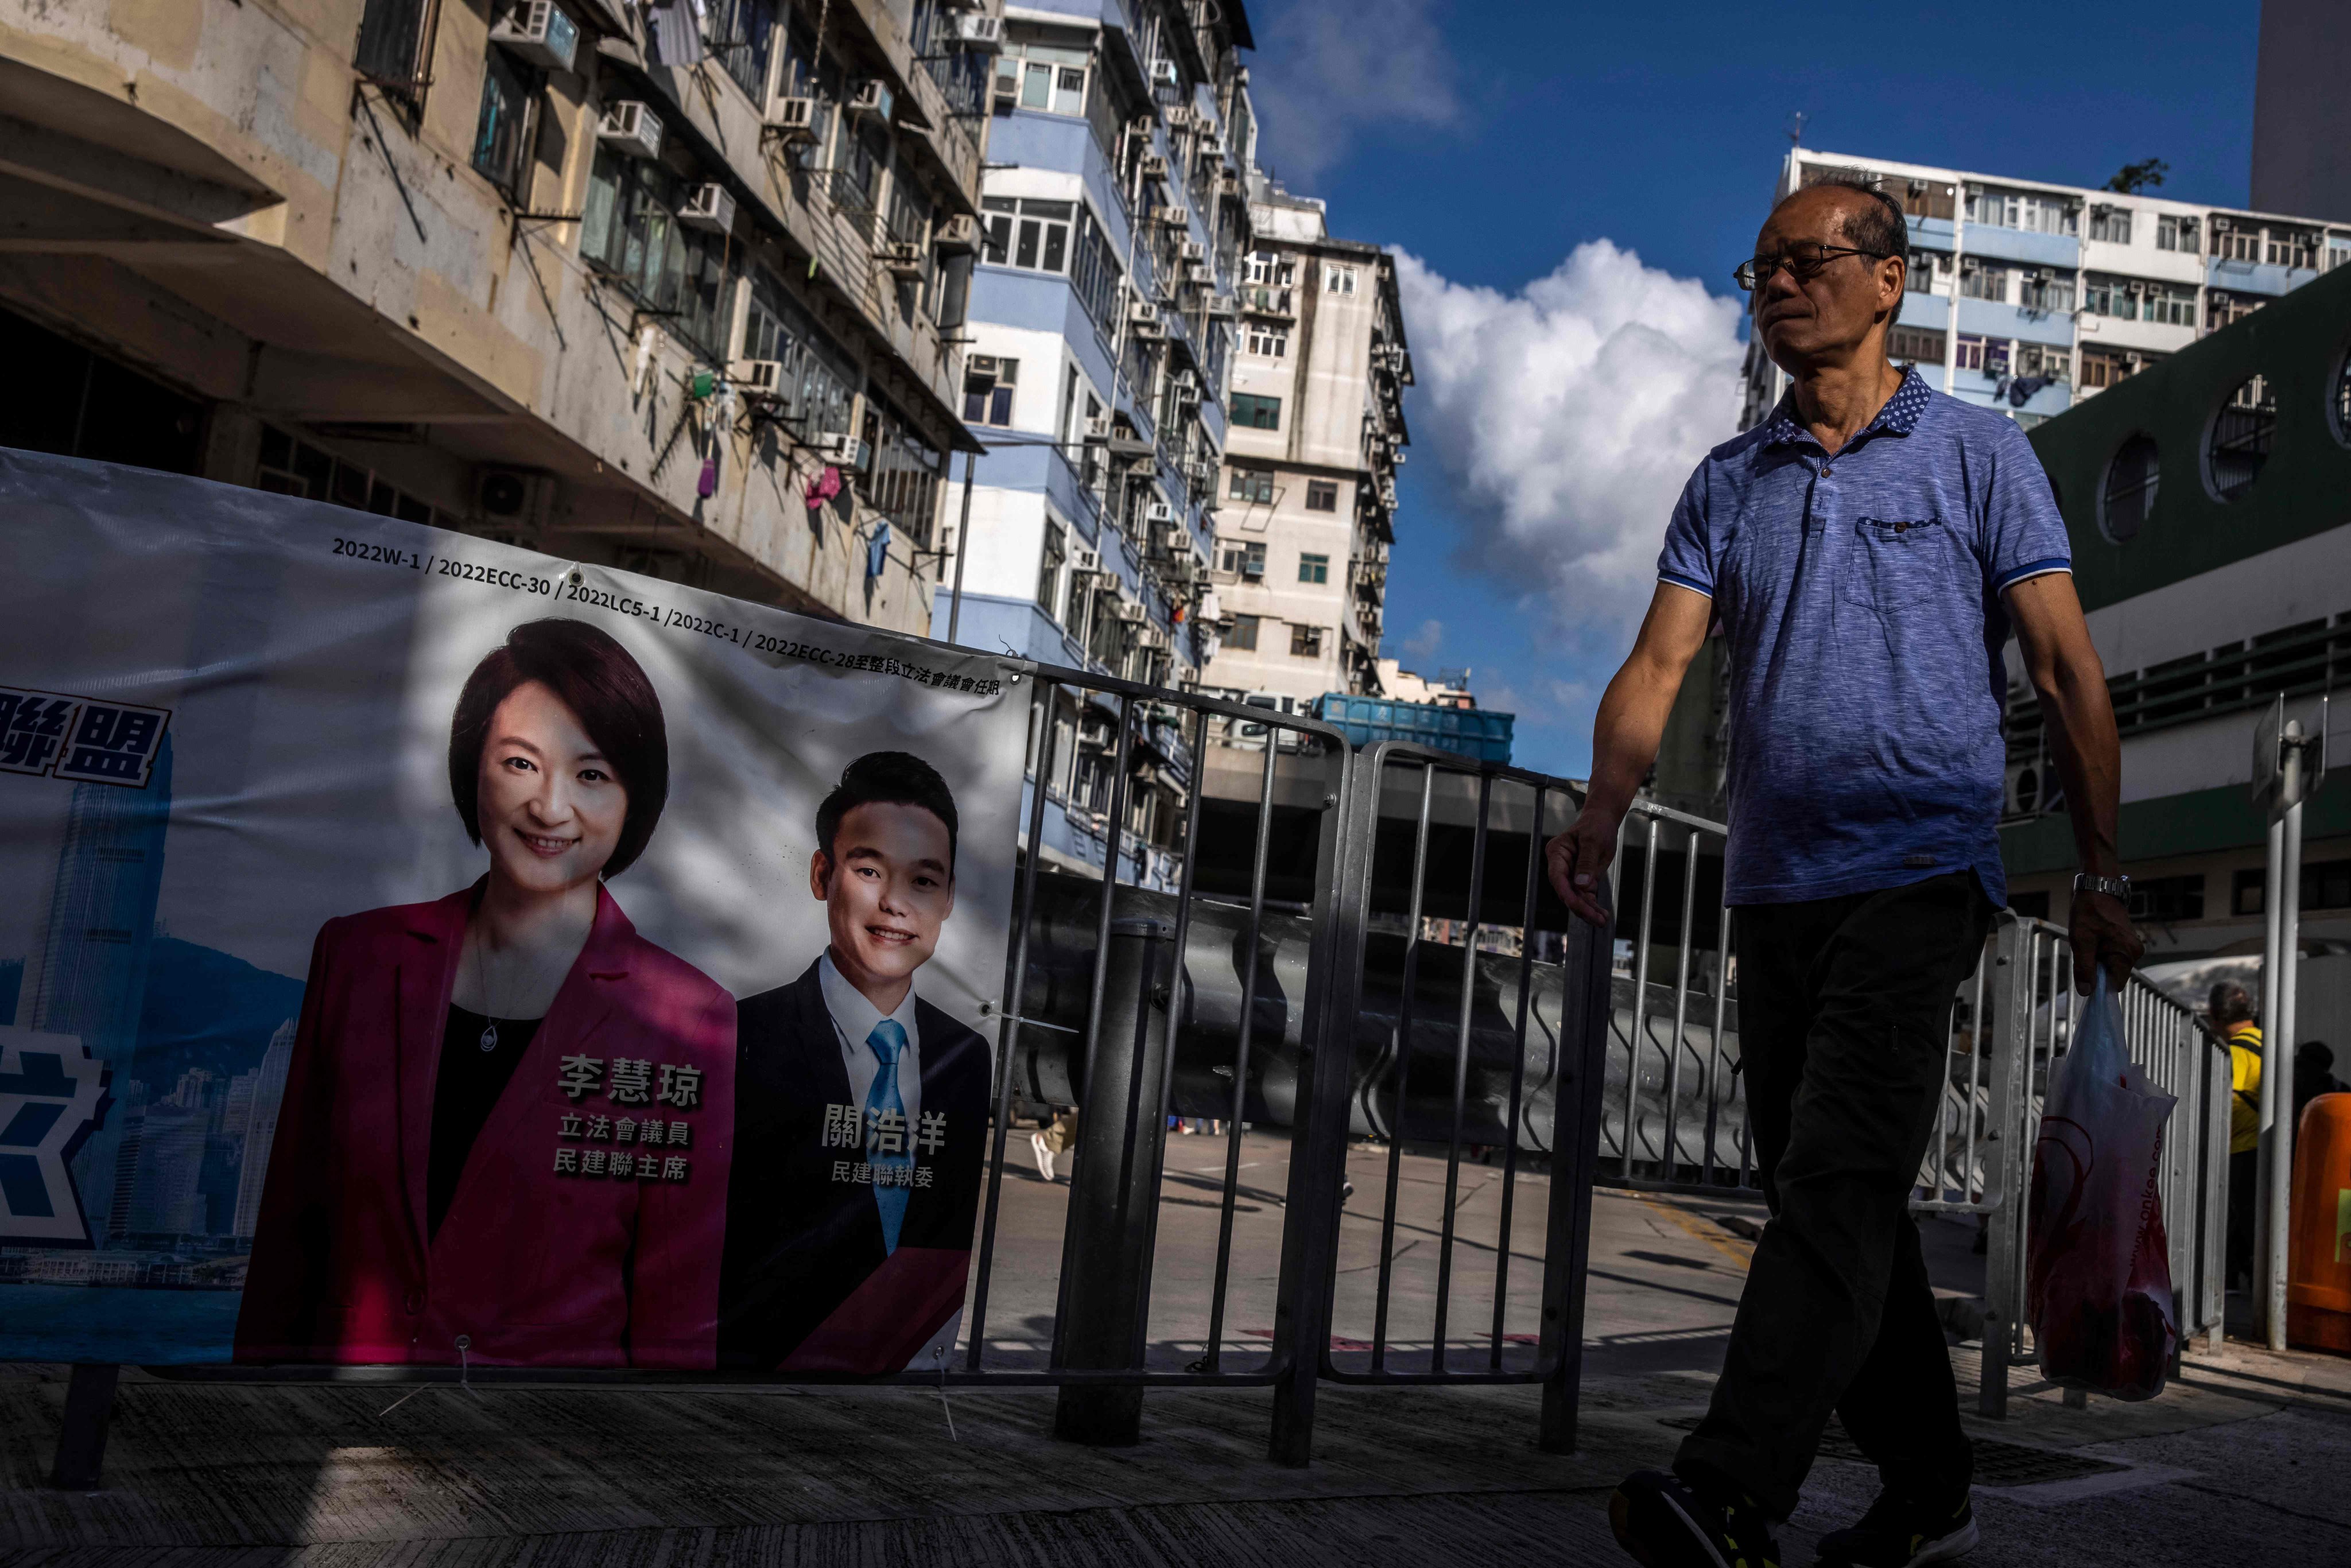 A man walks past a banner featuring Starry Lee, in To Kwa Wan on July 6, a constituency in Kowloon where she first won as an independent in 1999. She founded her political career in grass-roots and community work but now, district councillors have drastically diminished influence. Photo: AFP